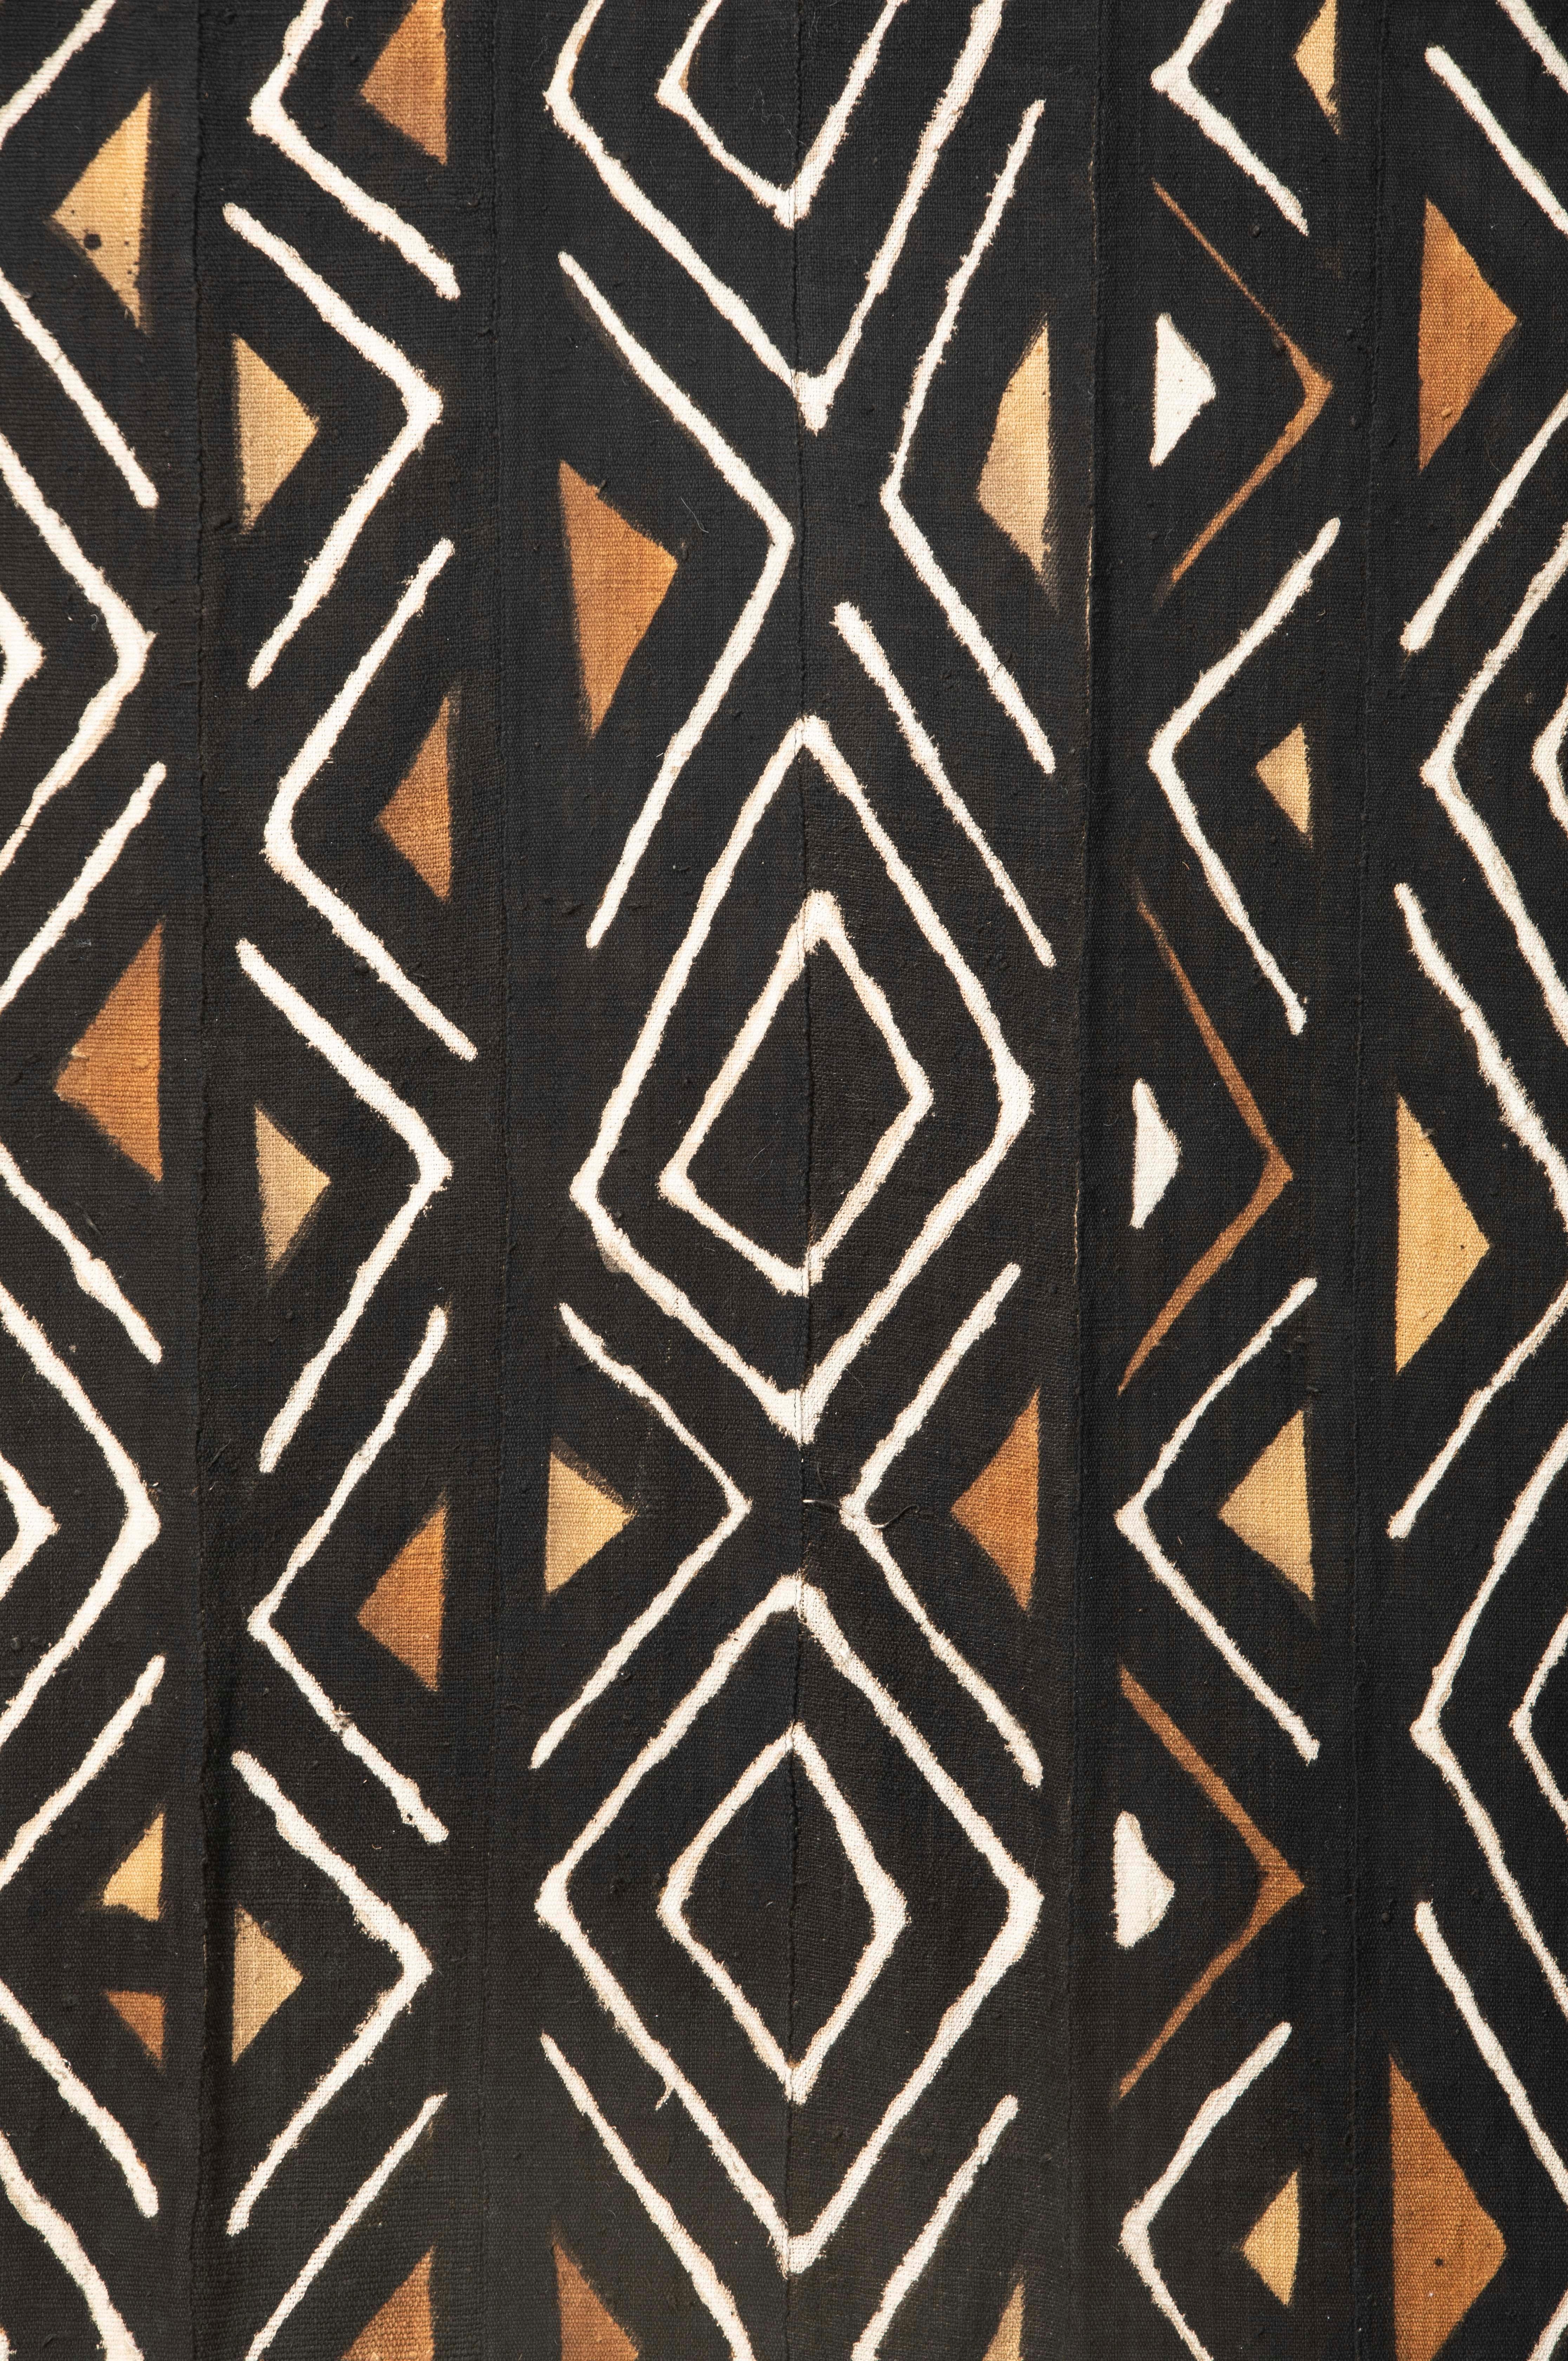 Black-brown-white interesting design Textile wall Art.
Dramatic in presentation and great on a white wall !
There are nine 5 inch wide sections stitched together and 70 inches long.
Top and bottom have 2 1/8 inch pockets to insert a pole for